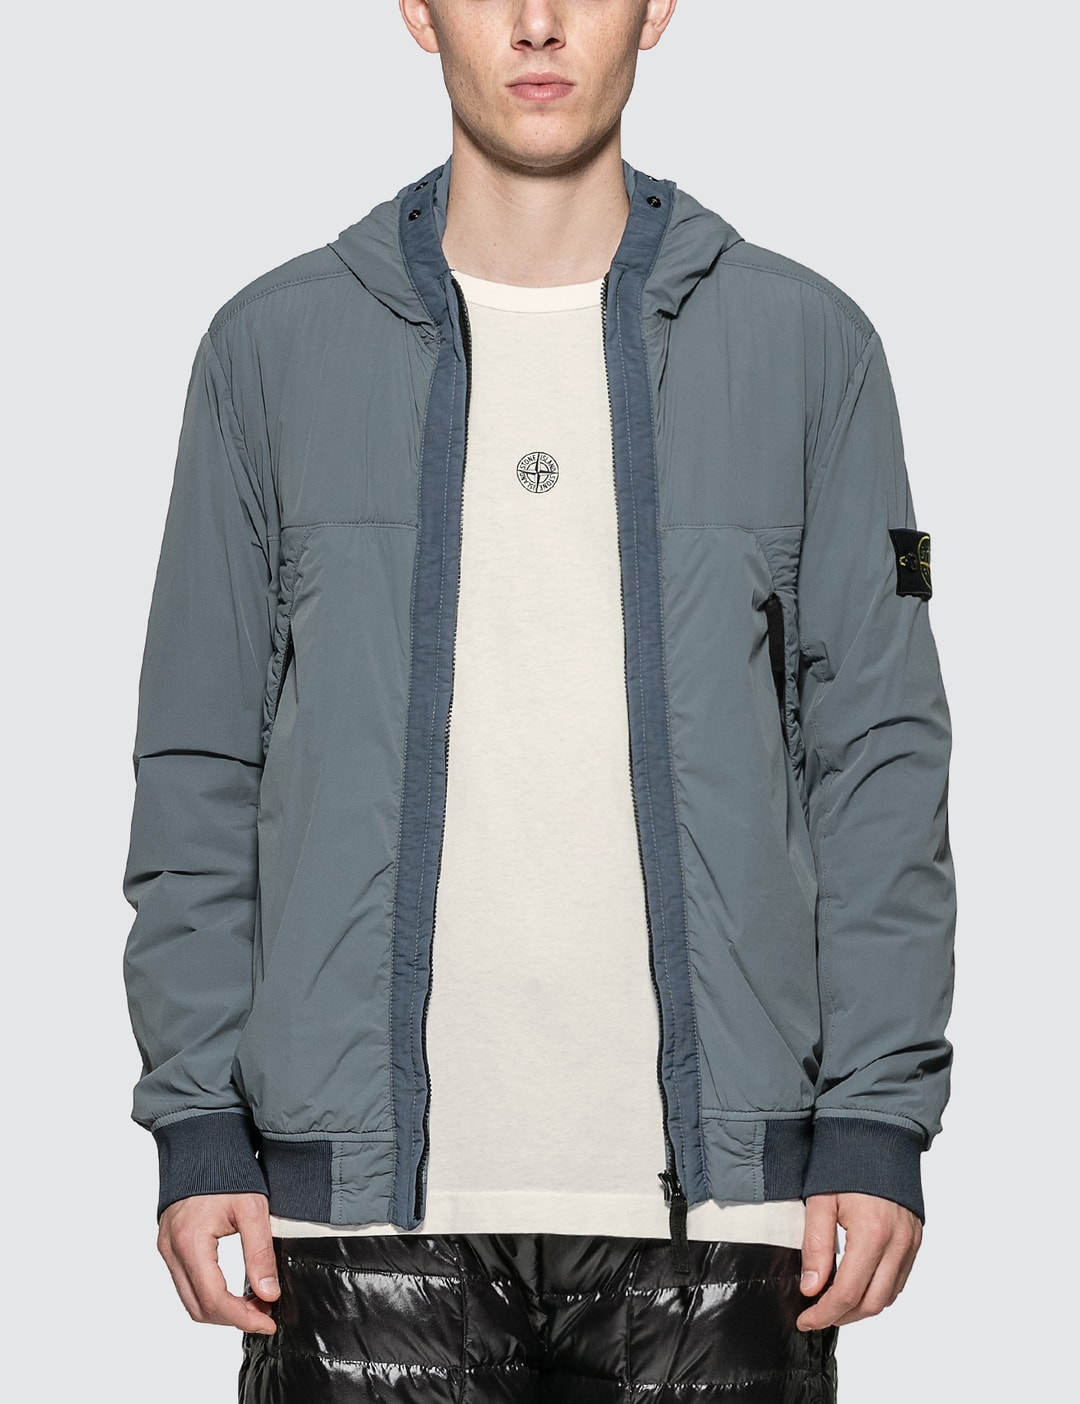 onwetendheid Bewolkt Nieuwsgierigheid Stone Island - Comfort Tech Composite Jacket | HBX - Globally Curated  Fashion and Lifestyle by Hypebeast